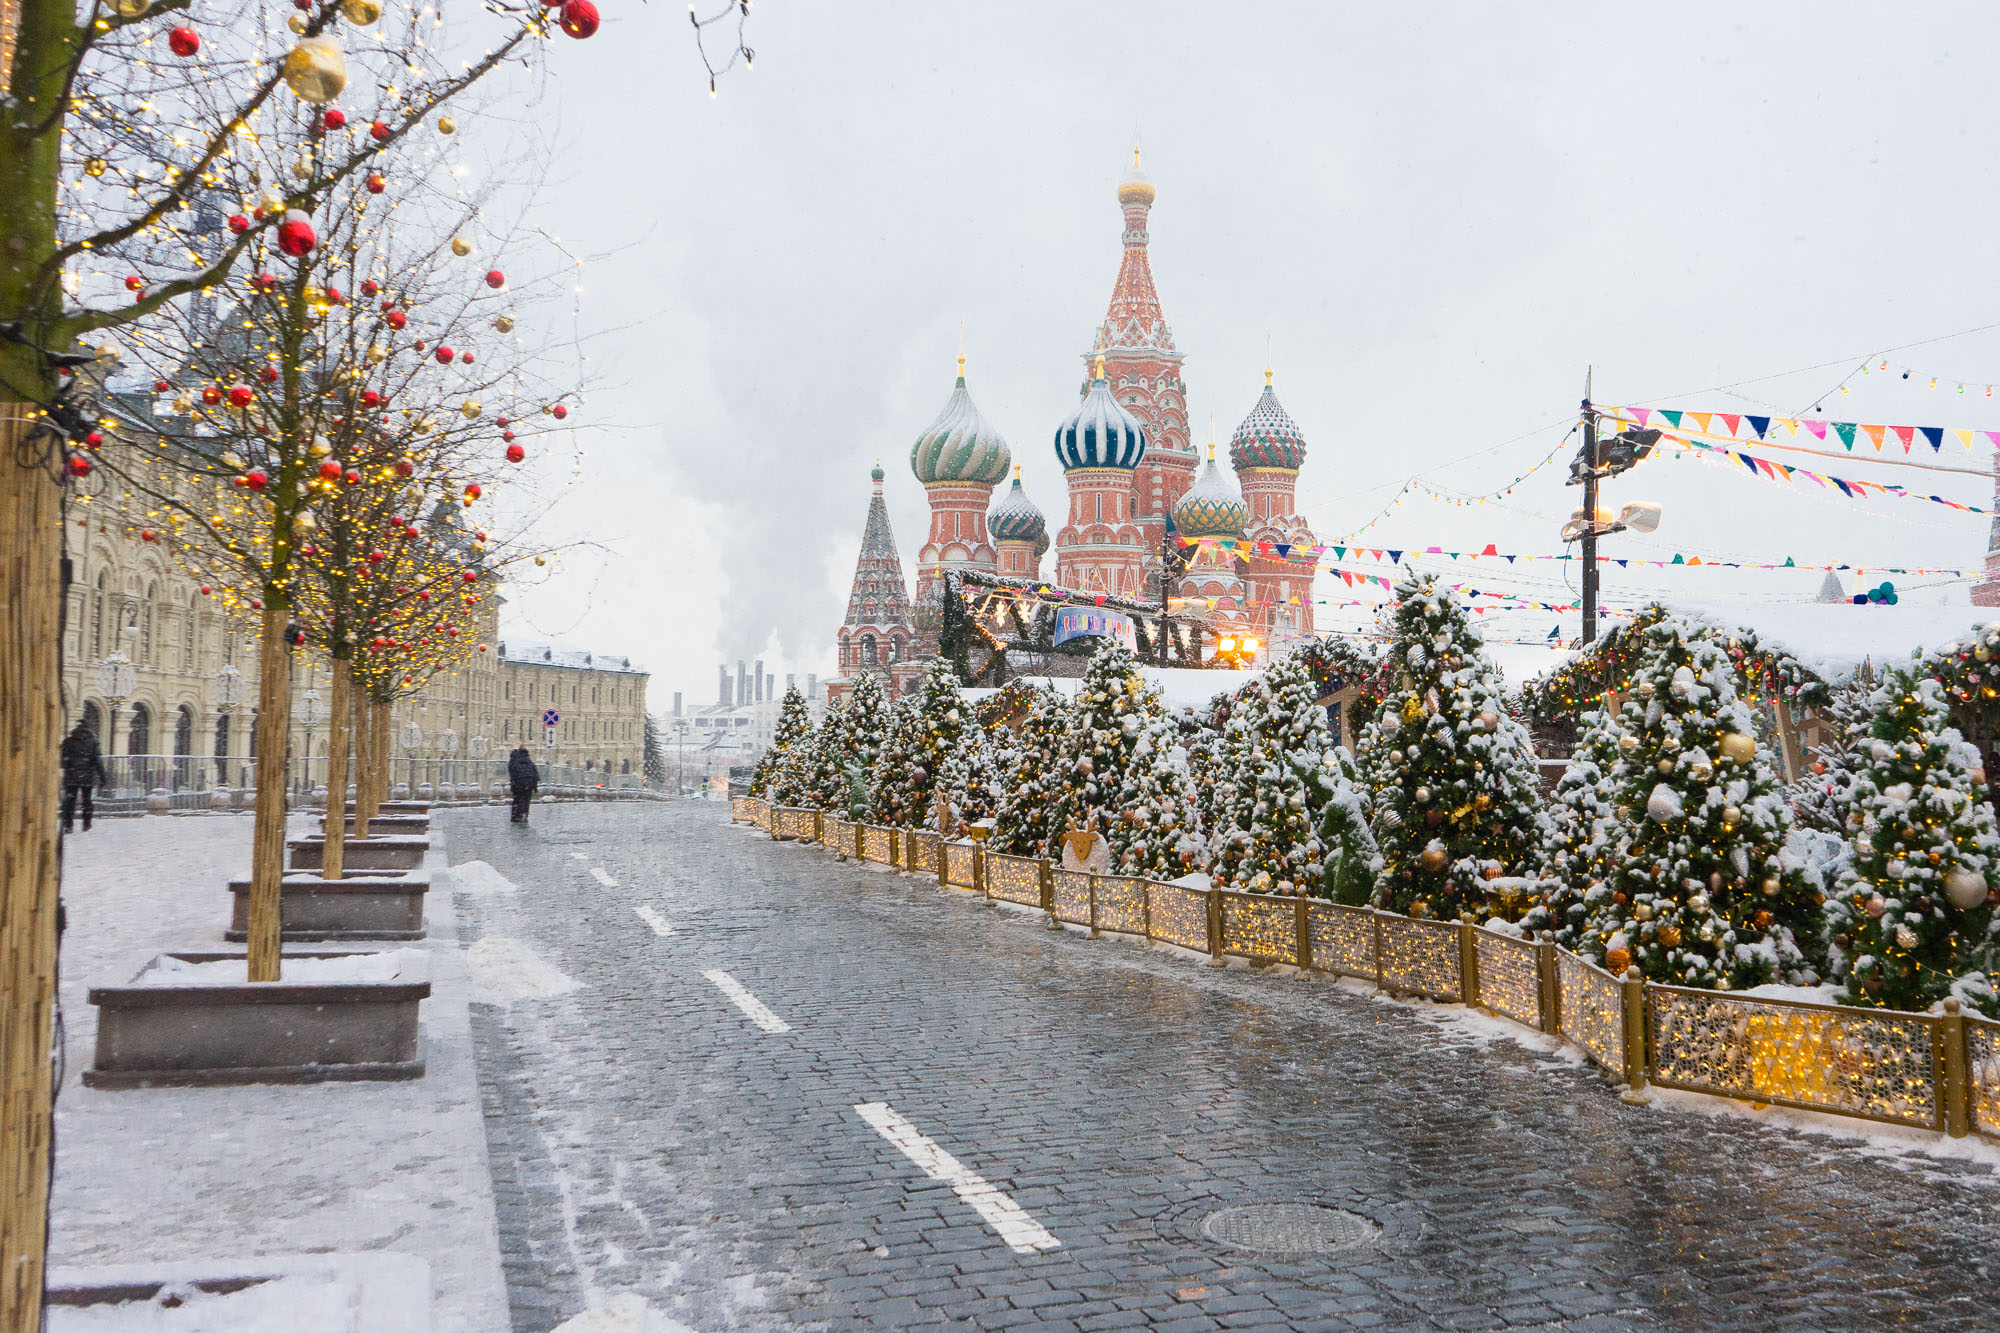 Red Square in the winter 2018